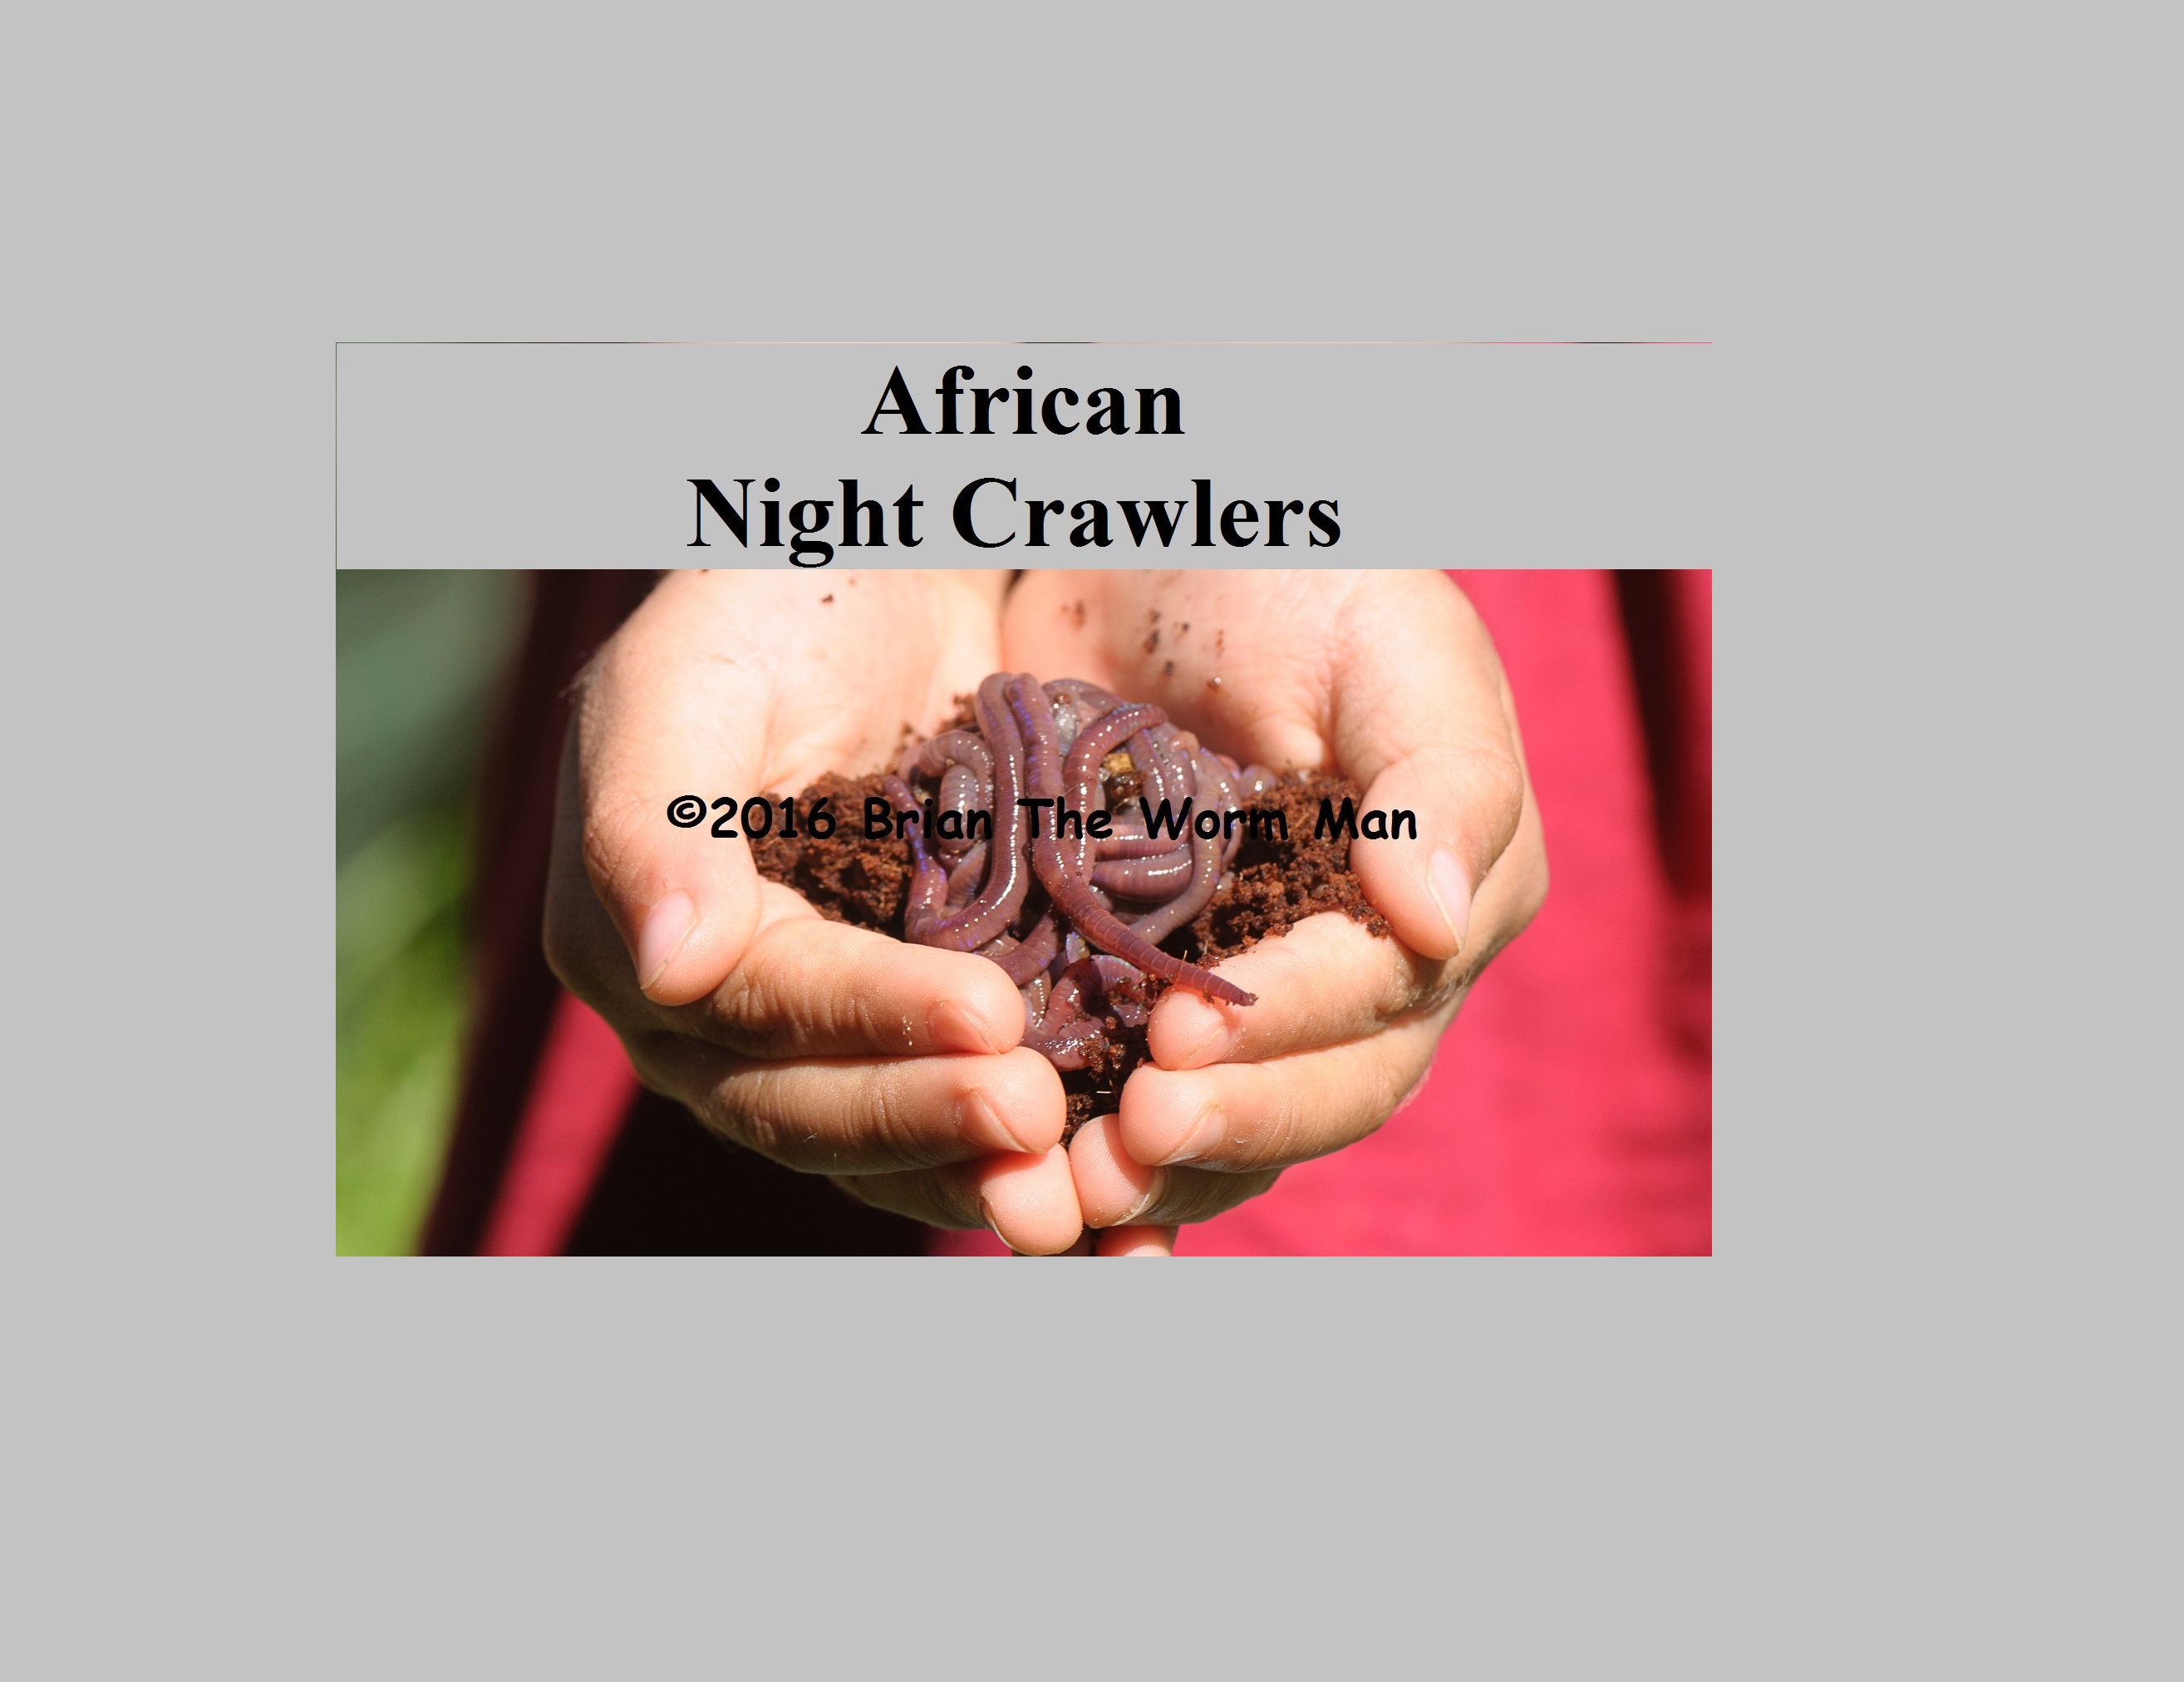 https://thewormman.com.au/wp-content/uploads/2018/11/Fishing-Bait-Worm-IMAGE-African-Night-Crawlers-3-in-large-greay-BG.jpg